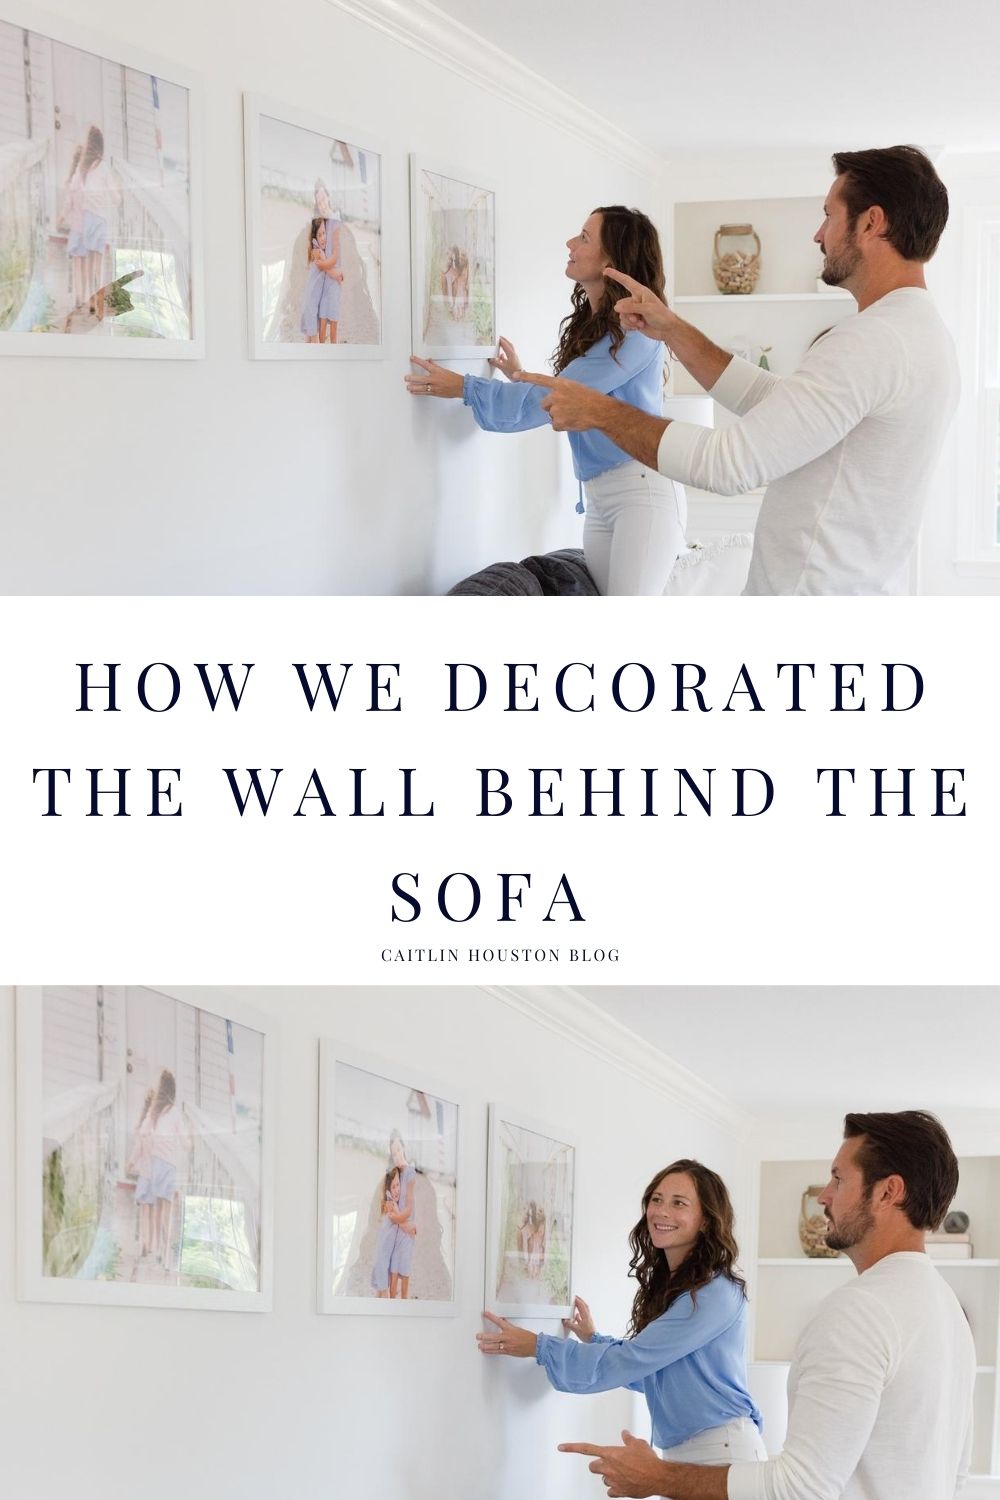 How We Decorated the Wall Behind the Sofa